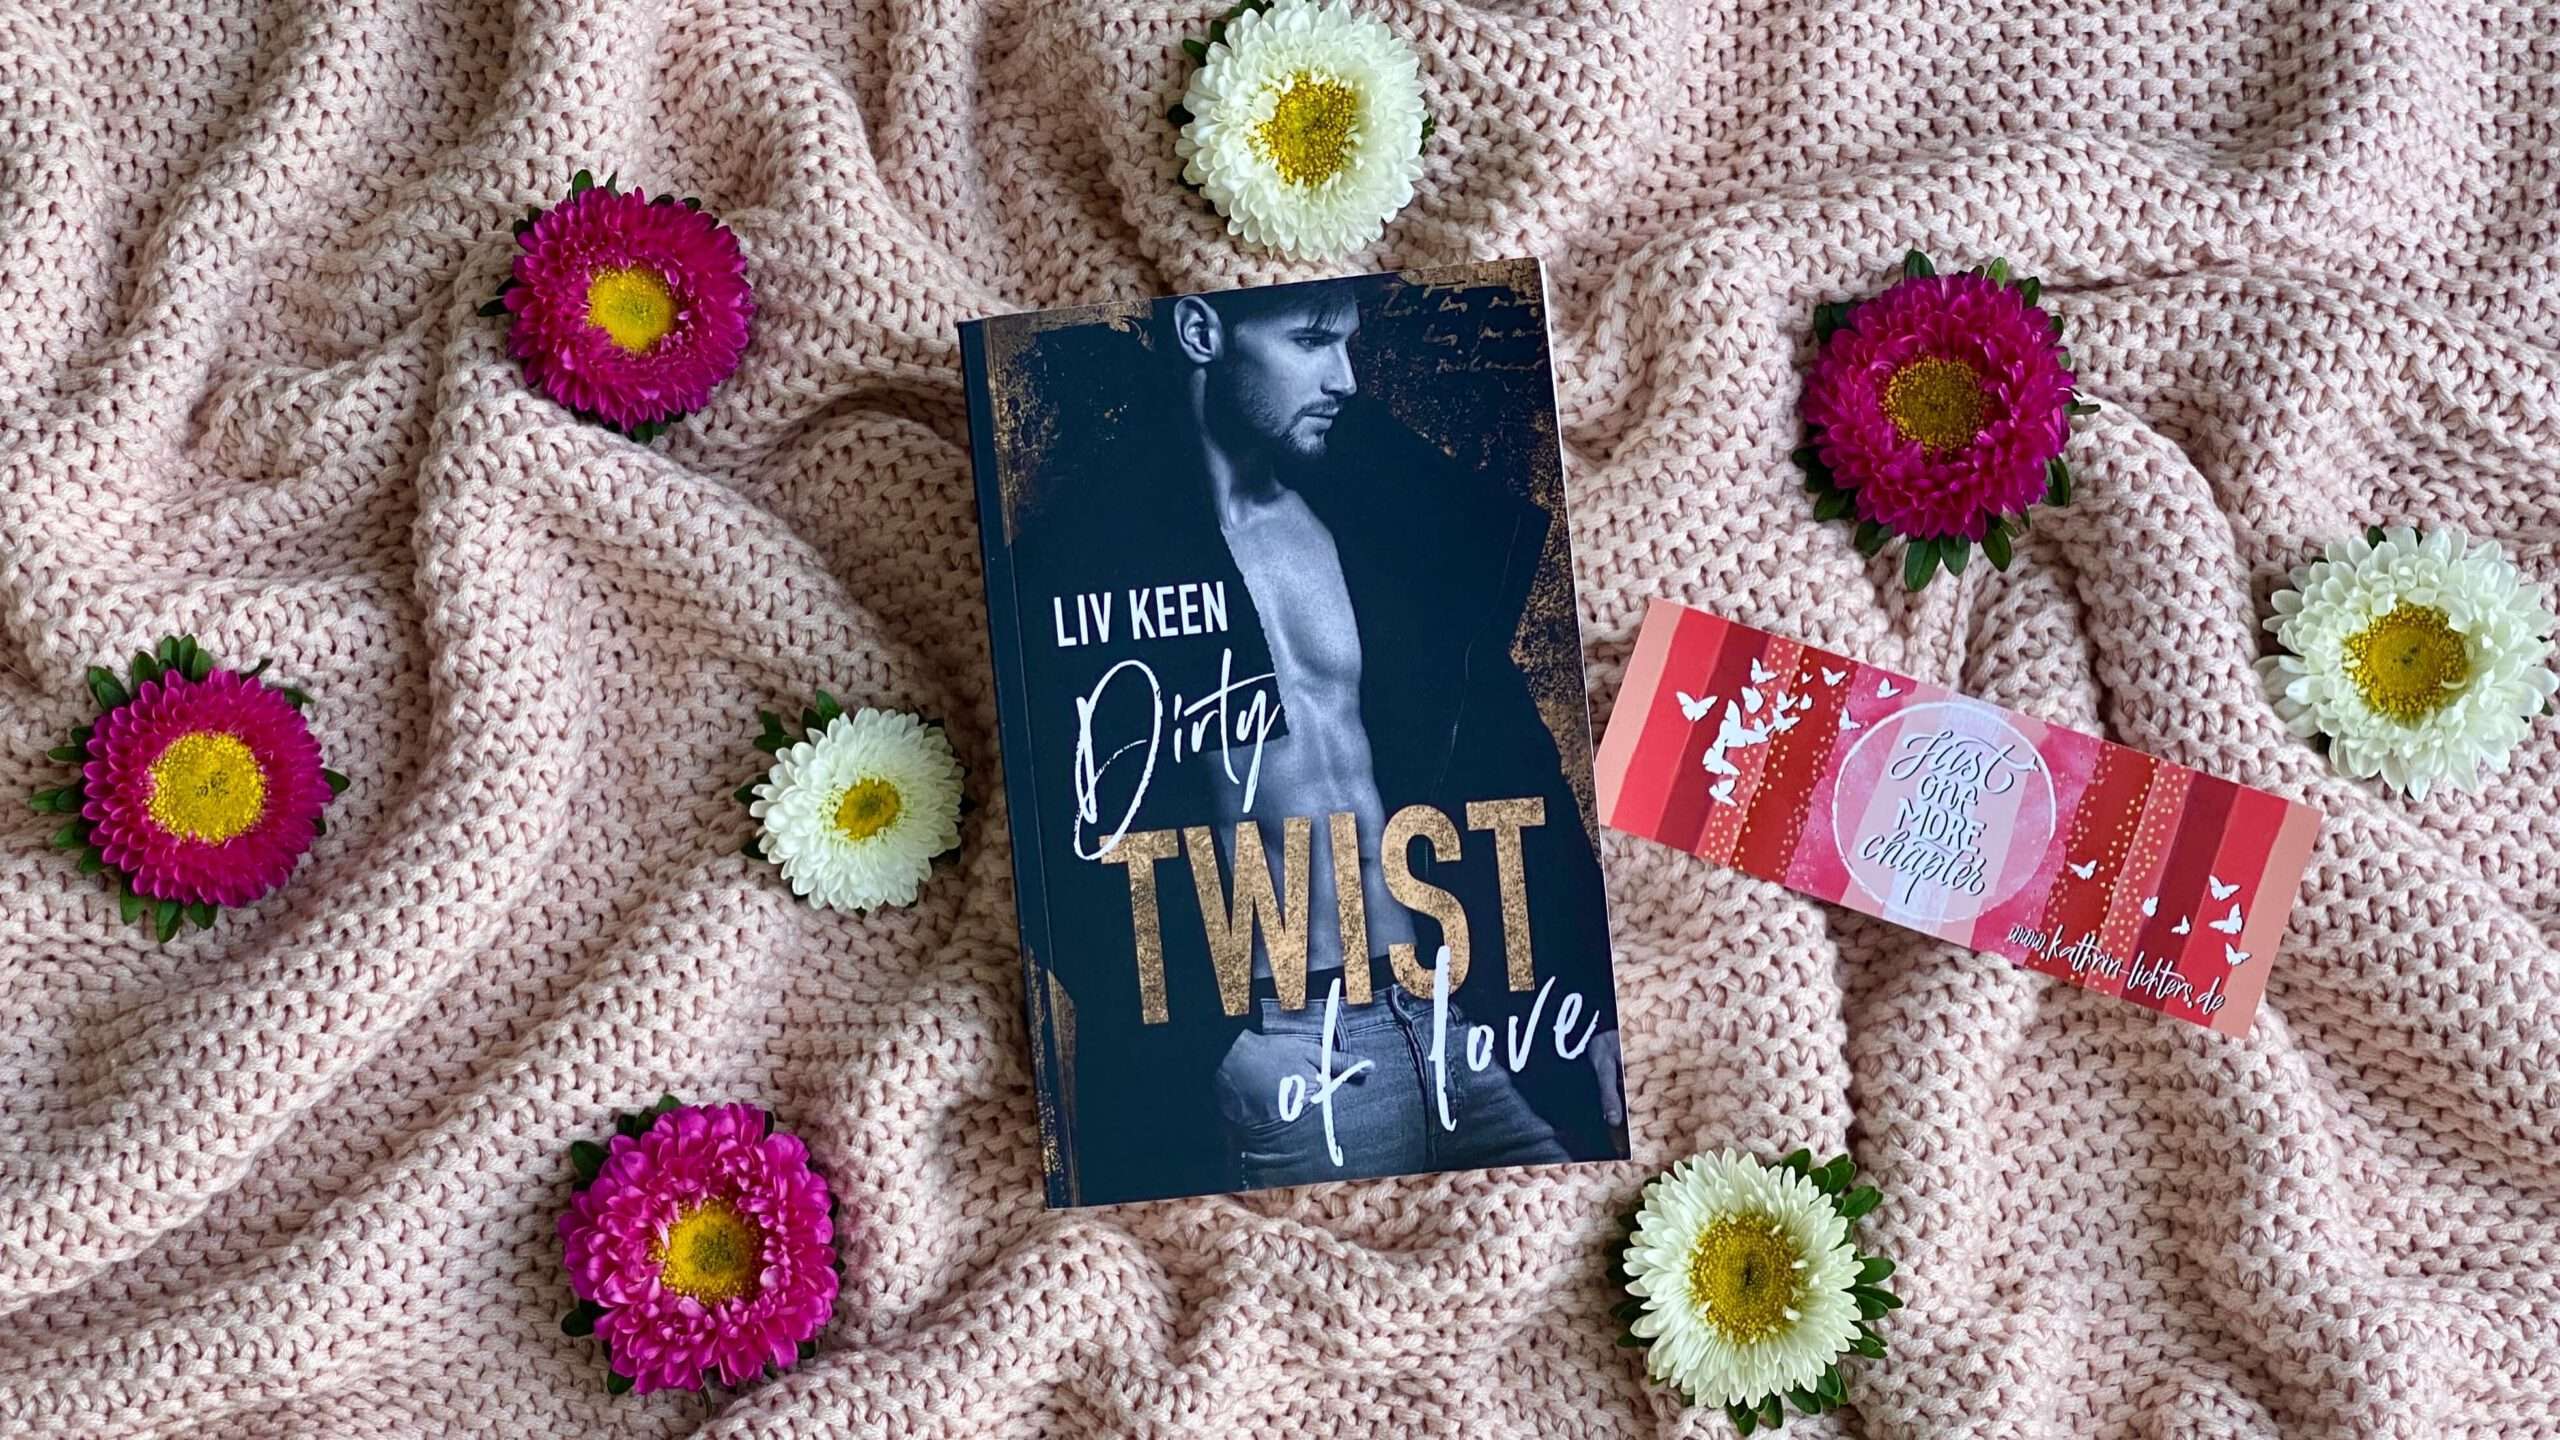 You are currently viewing „Dirty Twist of Love“ von Liv Keen